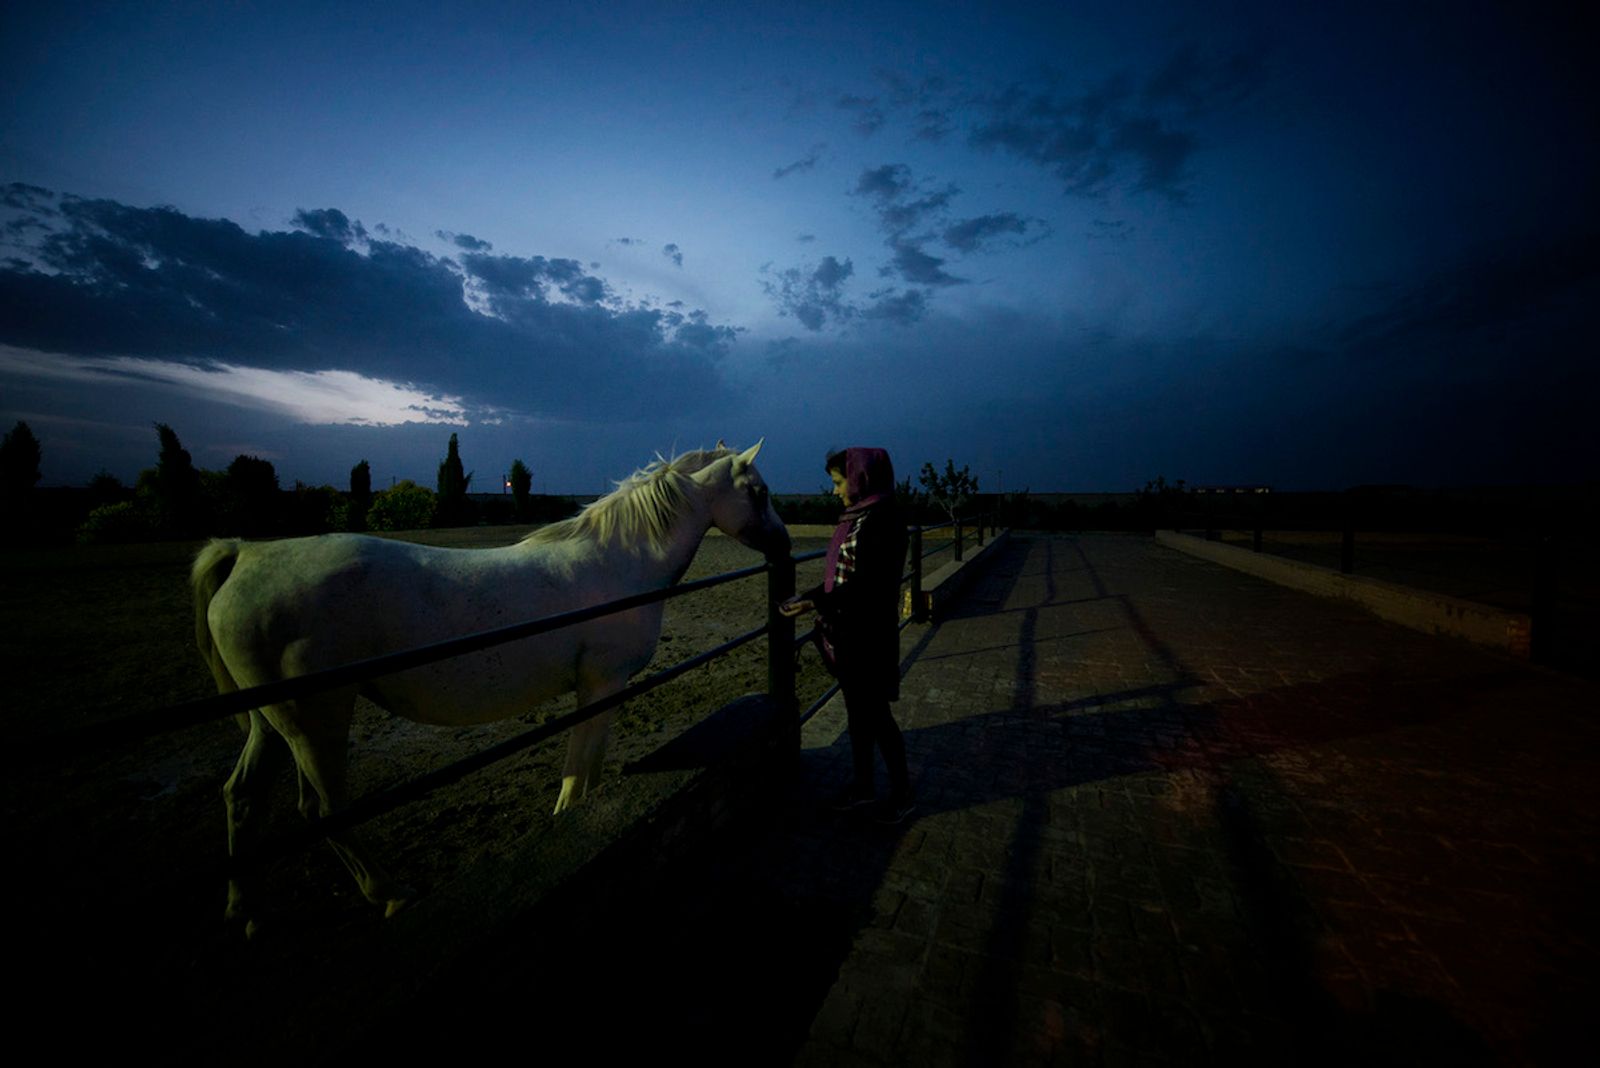 © Marjan Yazdi - Sogol, 27, horse lover. Since she was a small kid, she spent most of her free time with the horses.